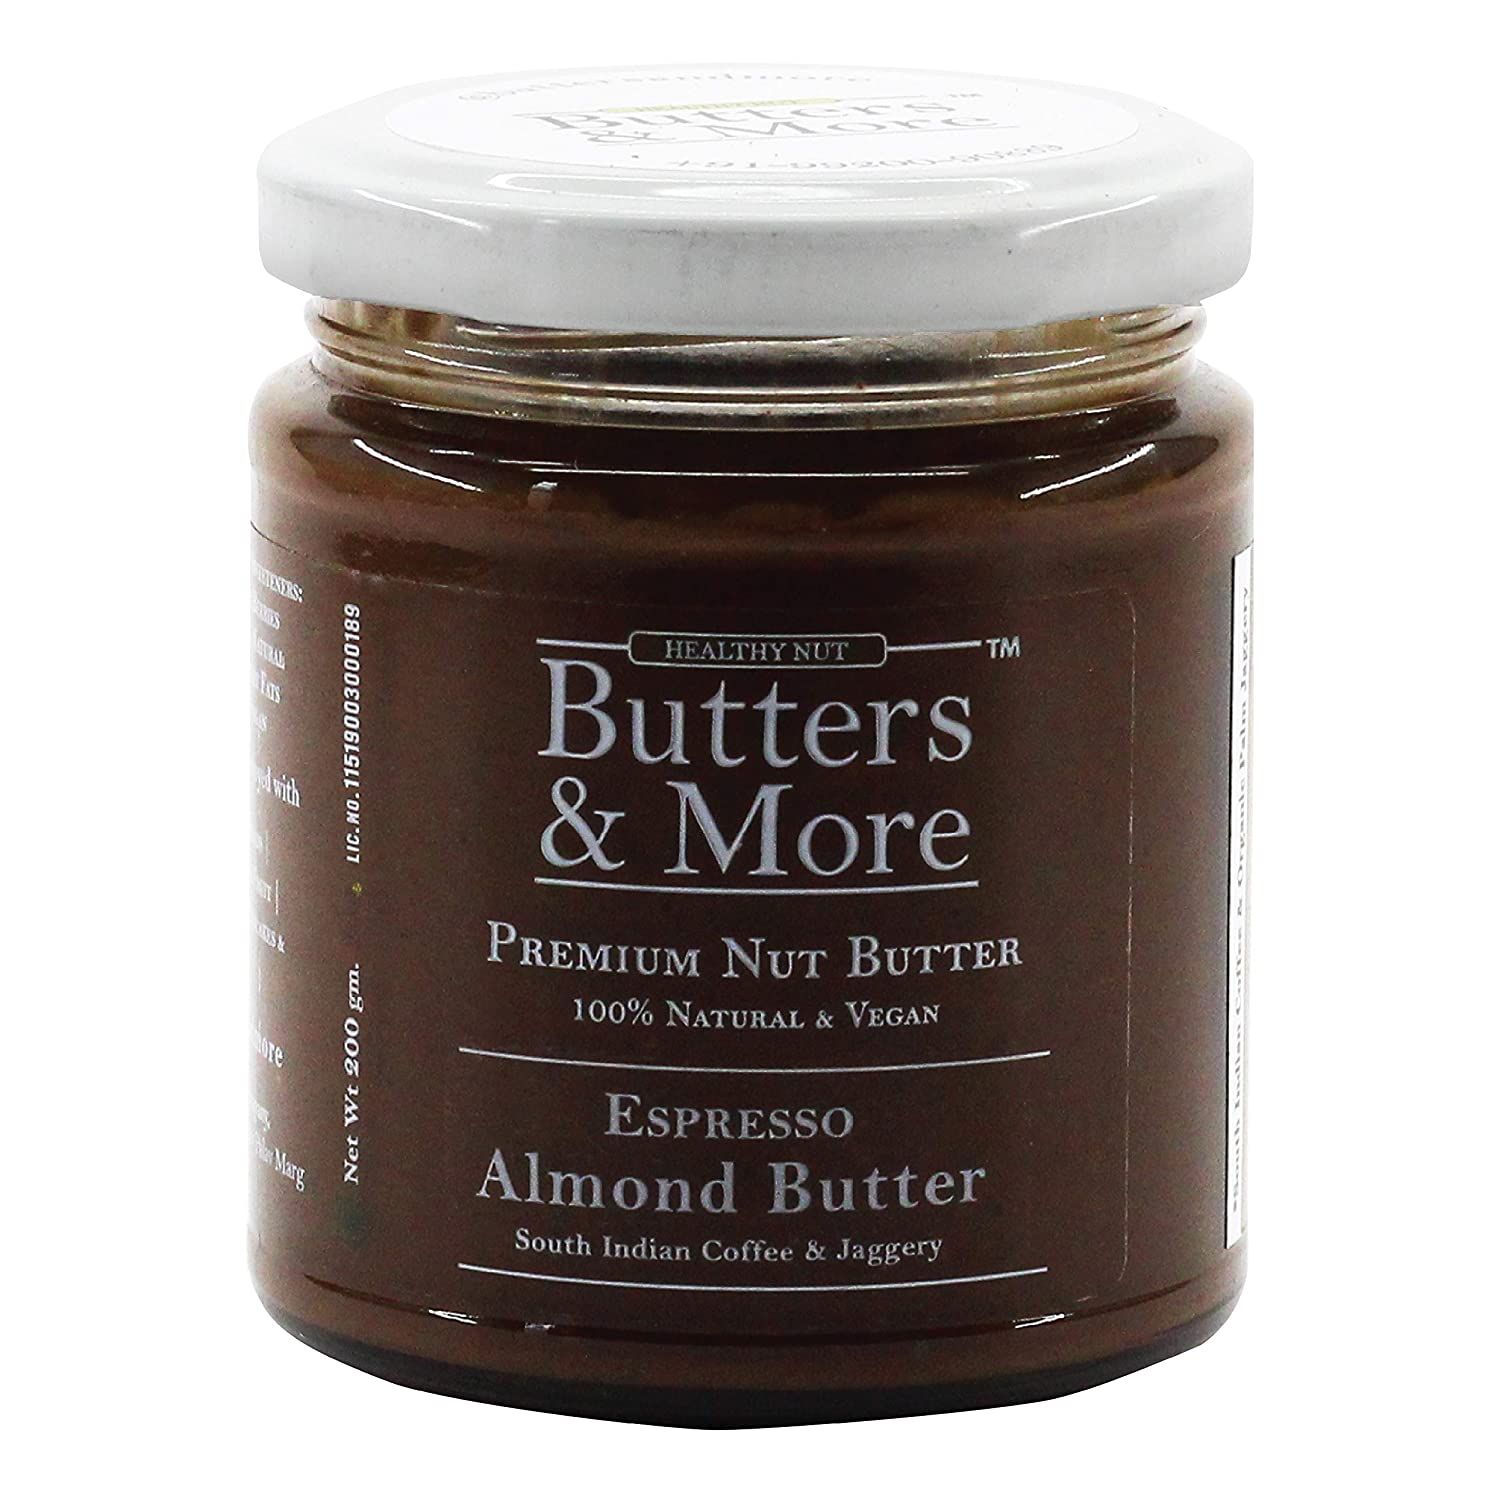 Butters & More Espresso Almond Butter with South Indian Coffee & Jaggery Image